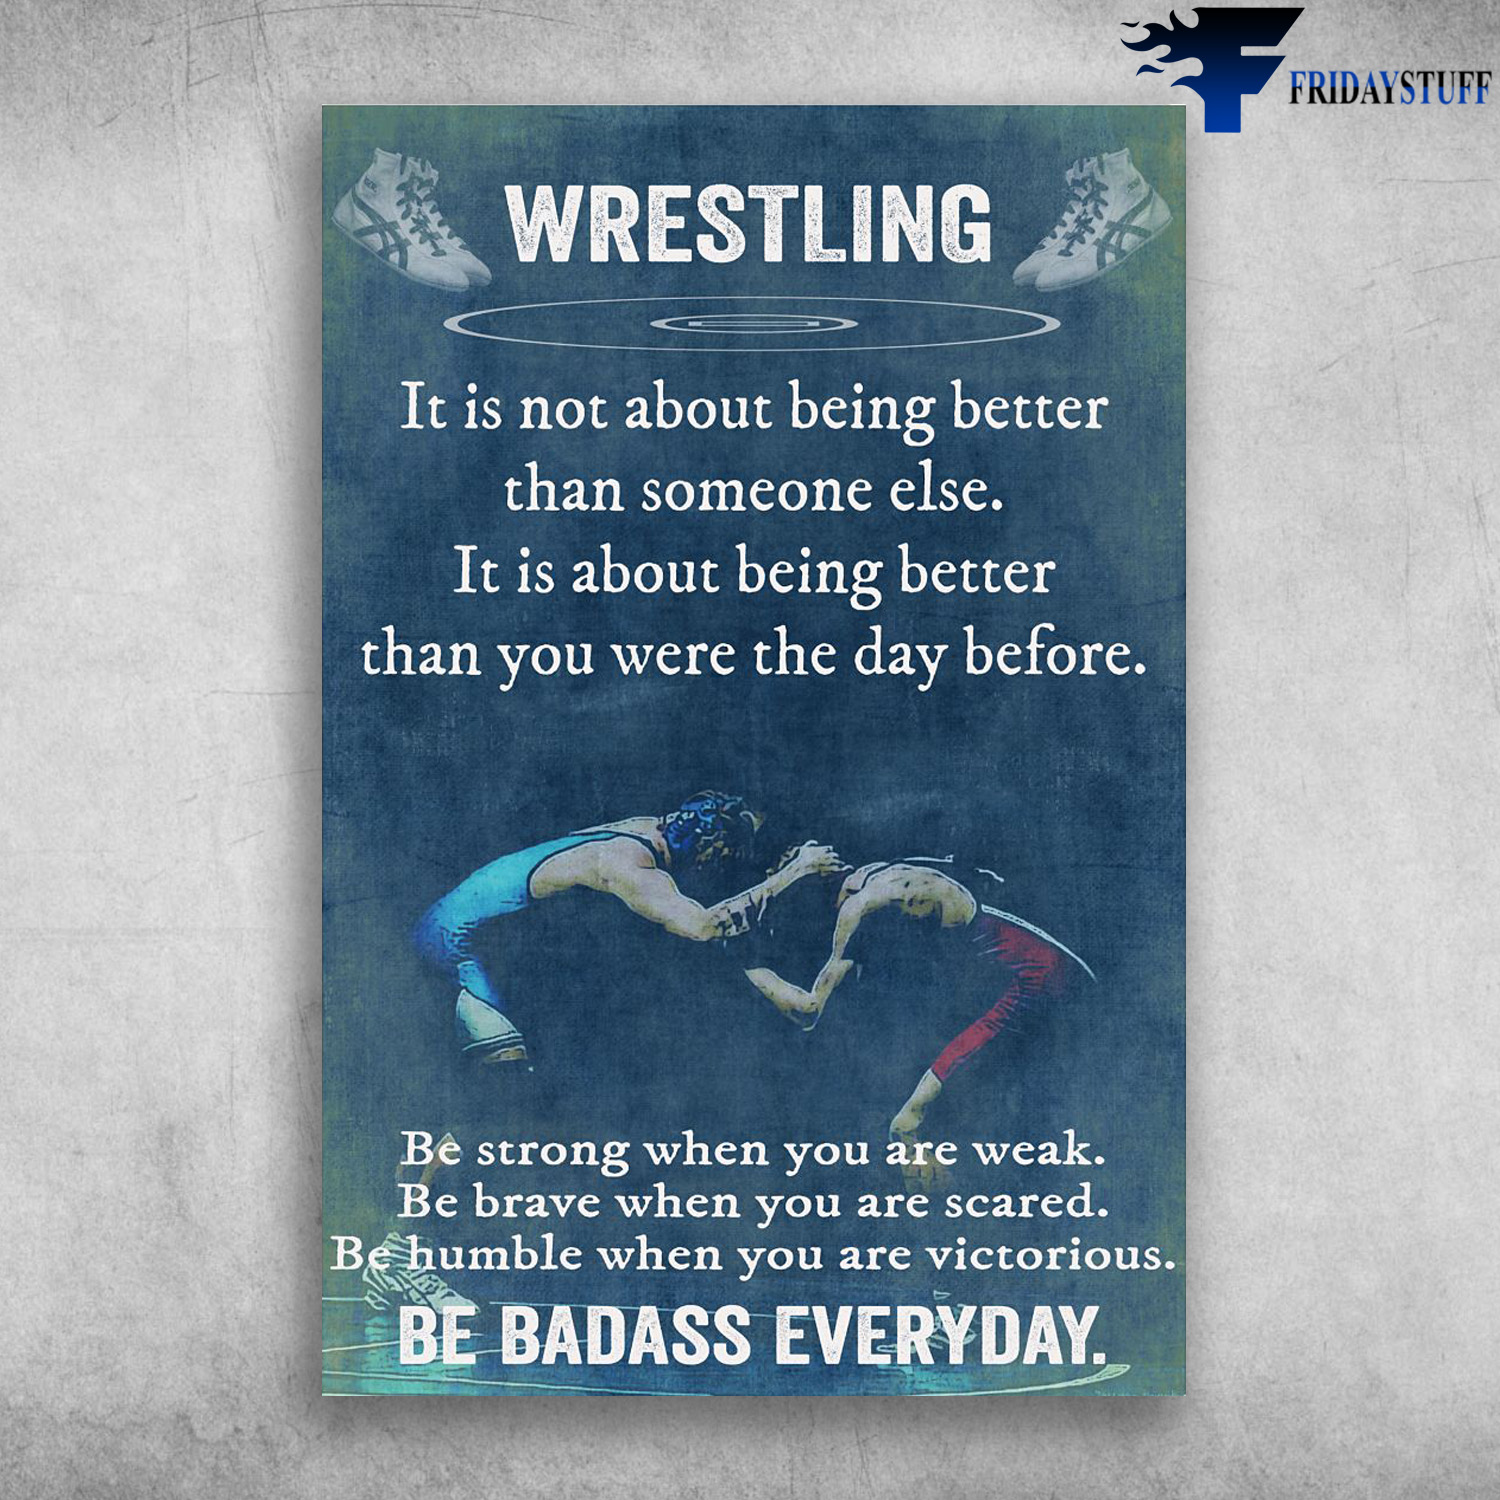 Wrestling - It Is Not About Being Better Than Someone Else, It Is About Being Better Than You Were The Day Before, Be Strong When You Are Weak, Be Braver When You Are Scared, Be Humble When You Are Victorious, Be Badass Everyday